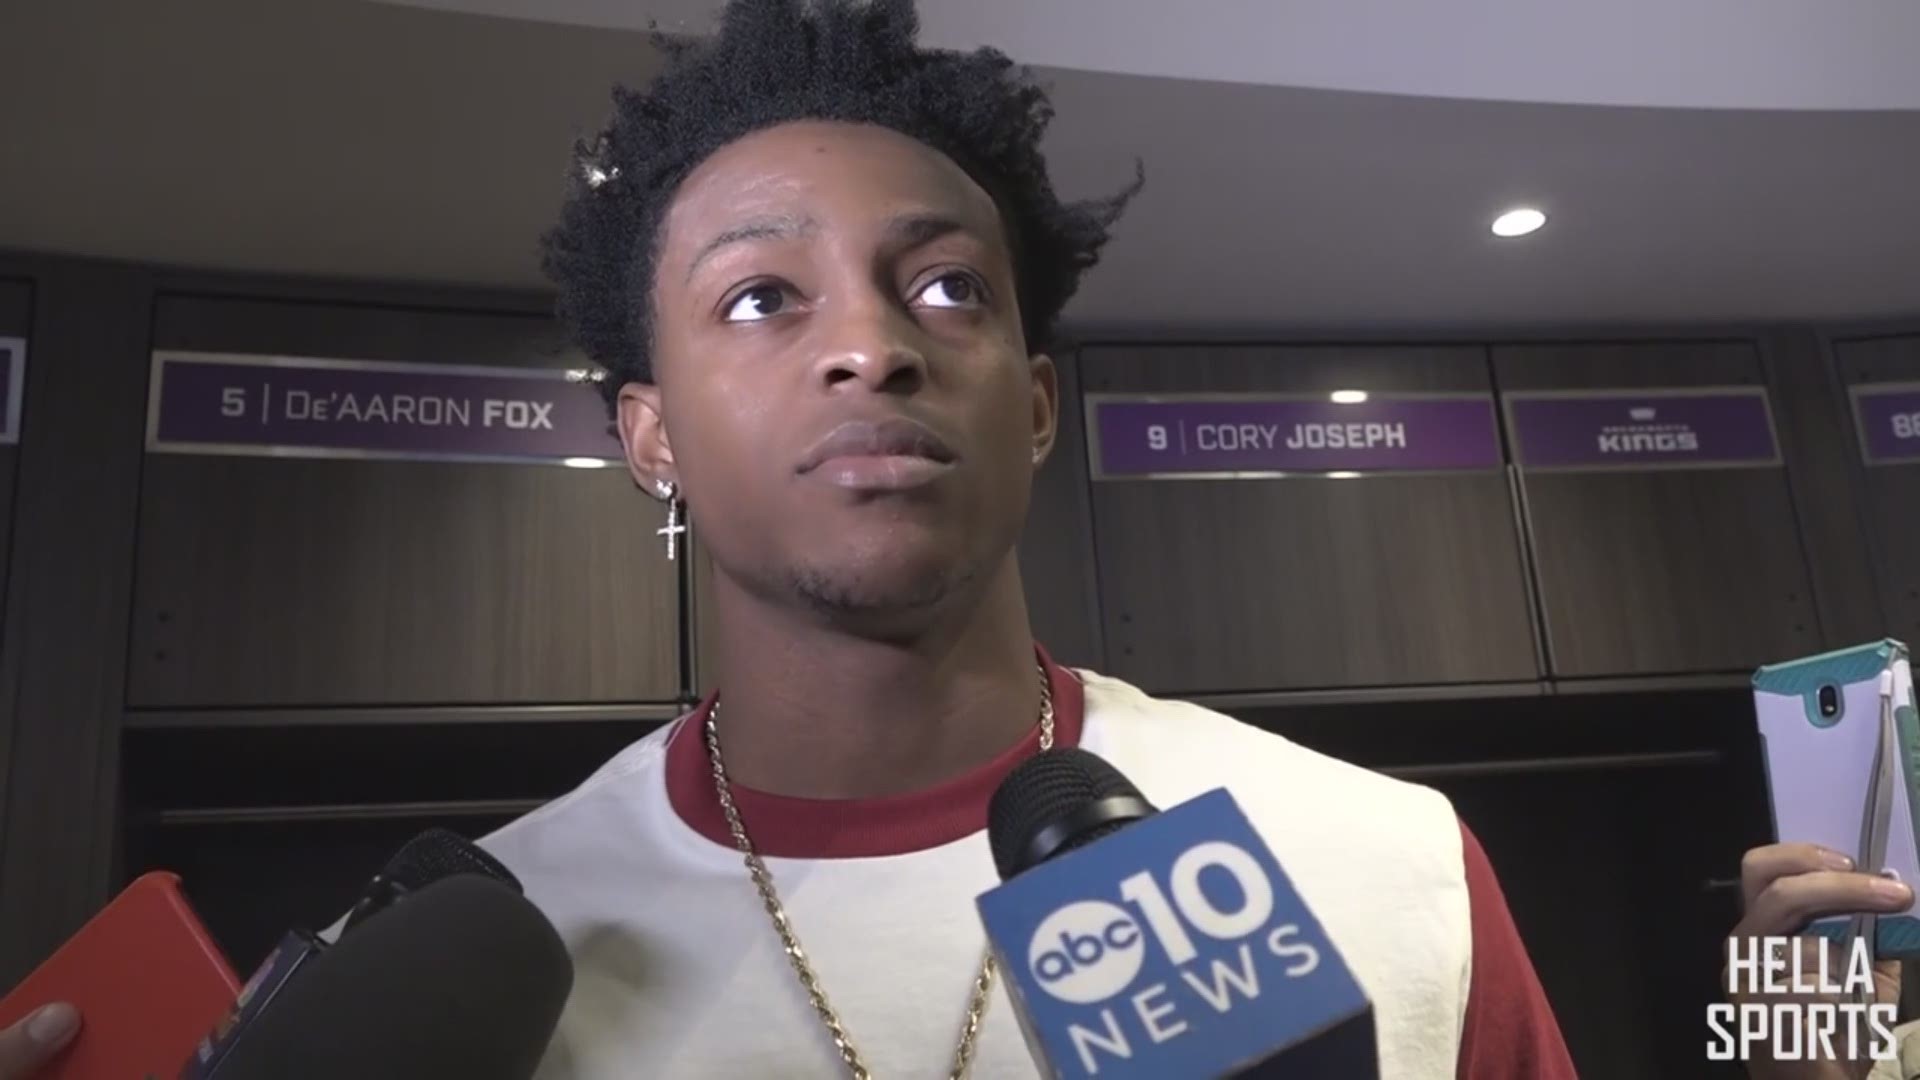 Sacramento Kings PG De’Aaron Fox discusses Thursday’s 129-125 victory over the Memphis Grizzlies on Thursday and the matchup with Ja Morant.